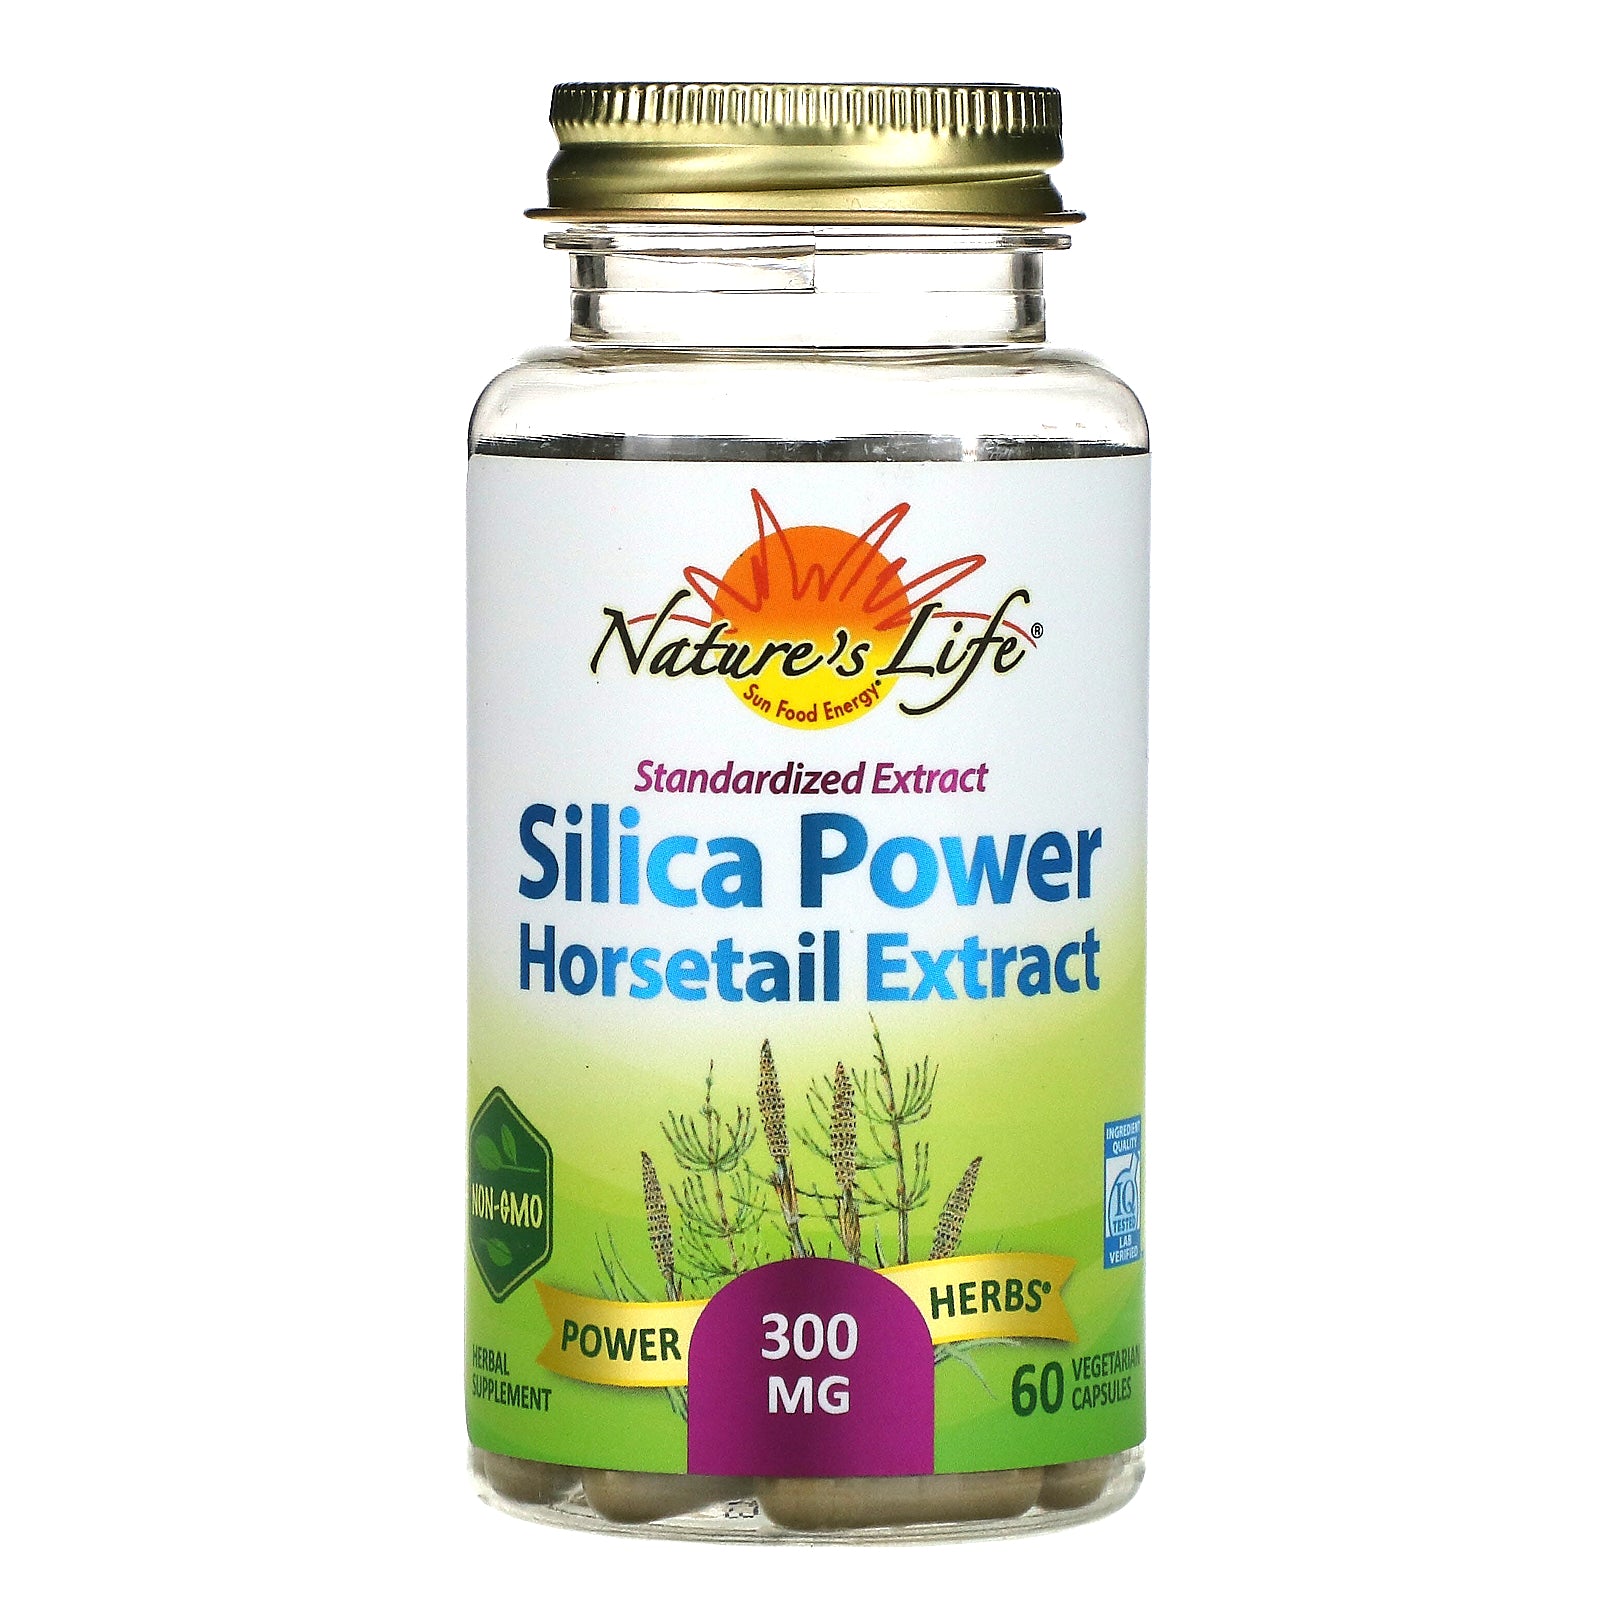 Nature's Herbs, Standardized Extract Silica-Power , 300 mg, 60 Vegetarian Capsules